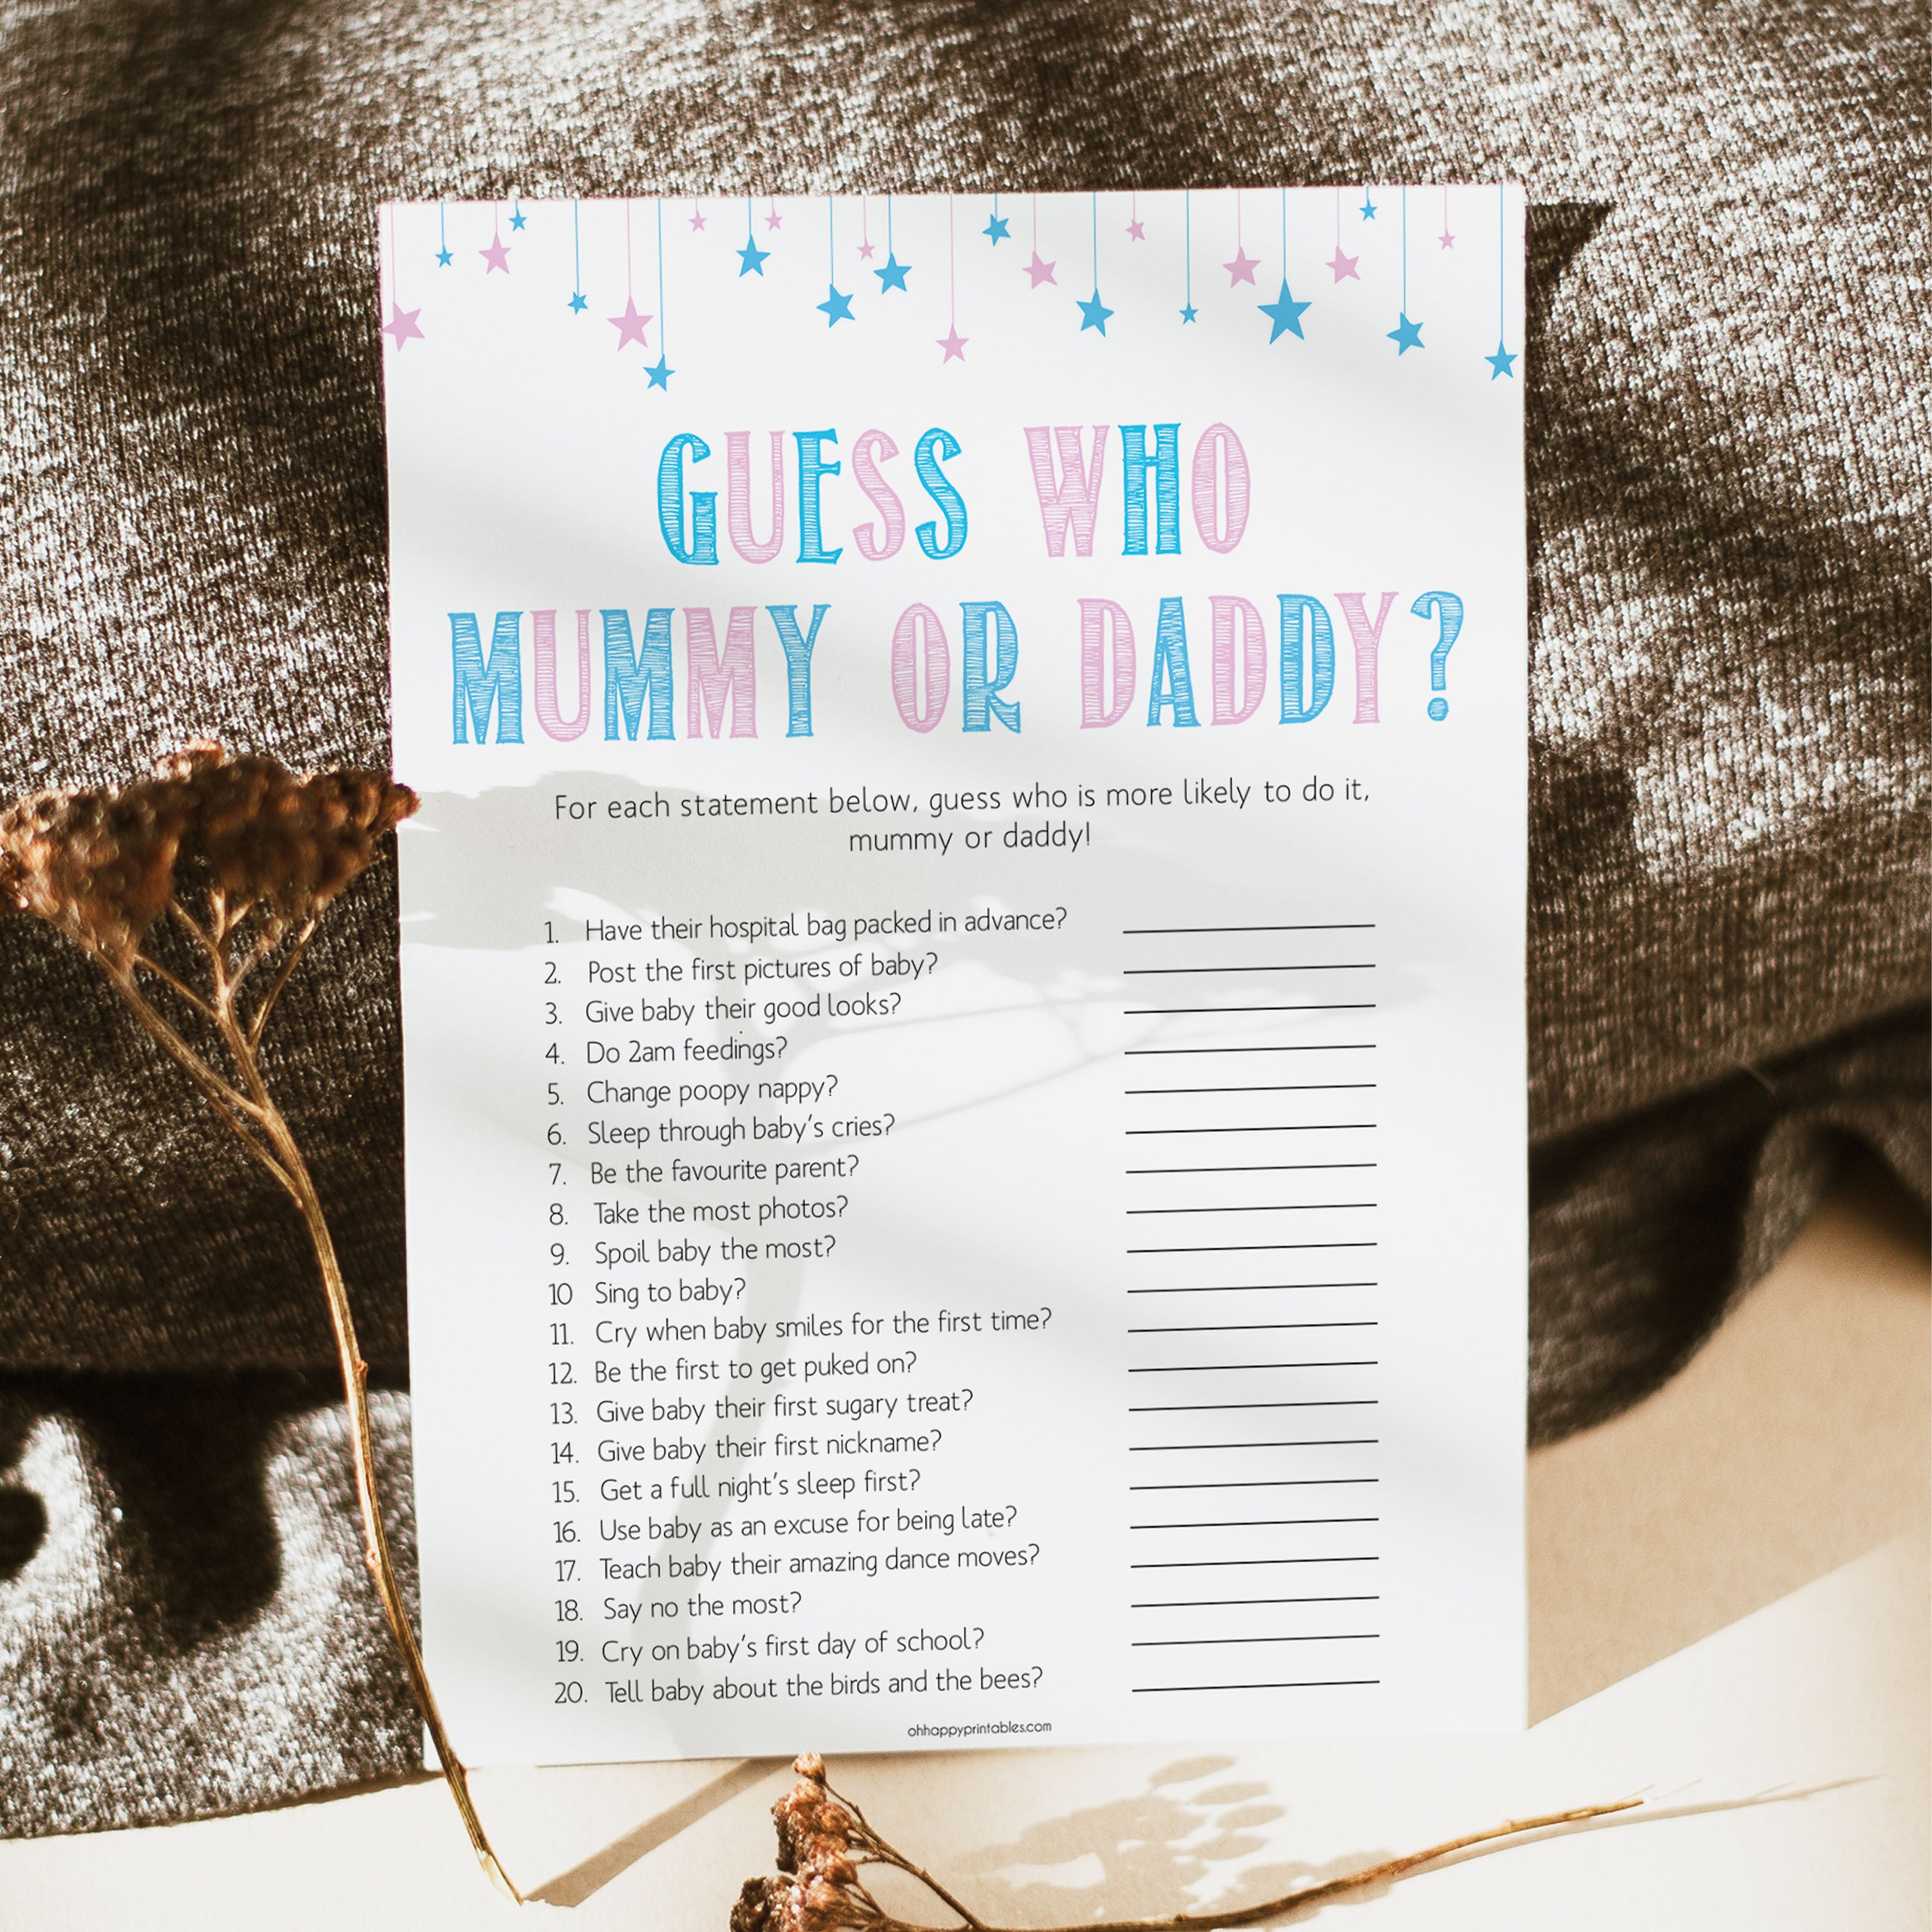 Gender reveal baby games, guess who mommy and daddy baby game, gender reveal shower, fun baby games, gender reveal ideas, popular baby games, best baby games, printable baby games, gender reveal baby games